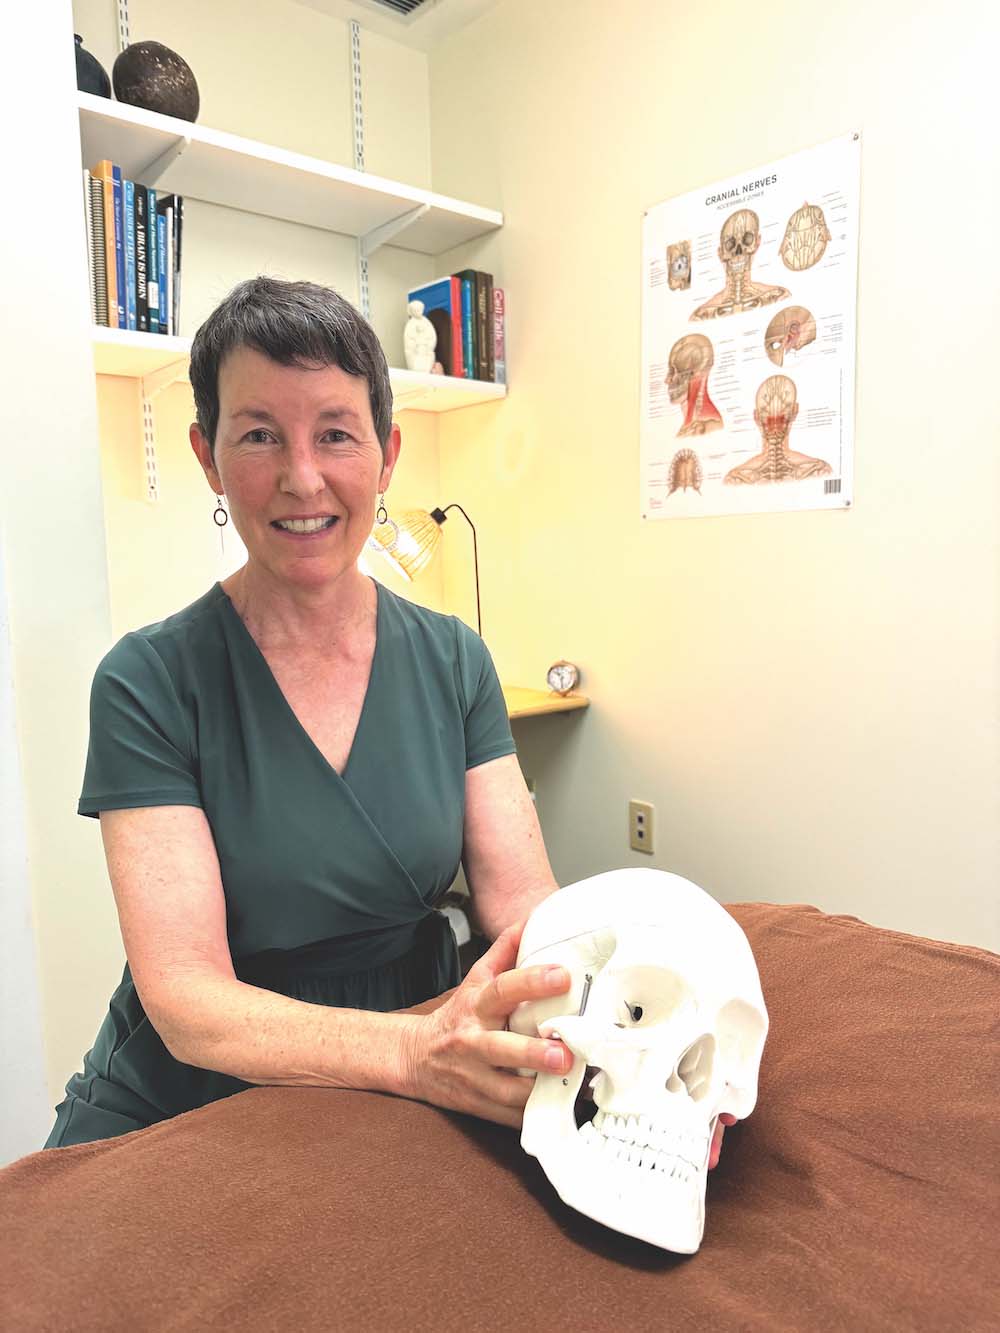 Profiles: Bristol therapist helps heal bodies by listening with her hands - Addison Independent